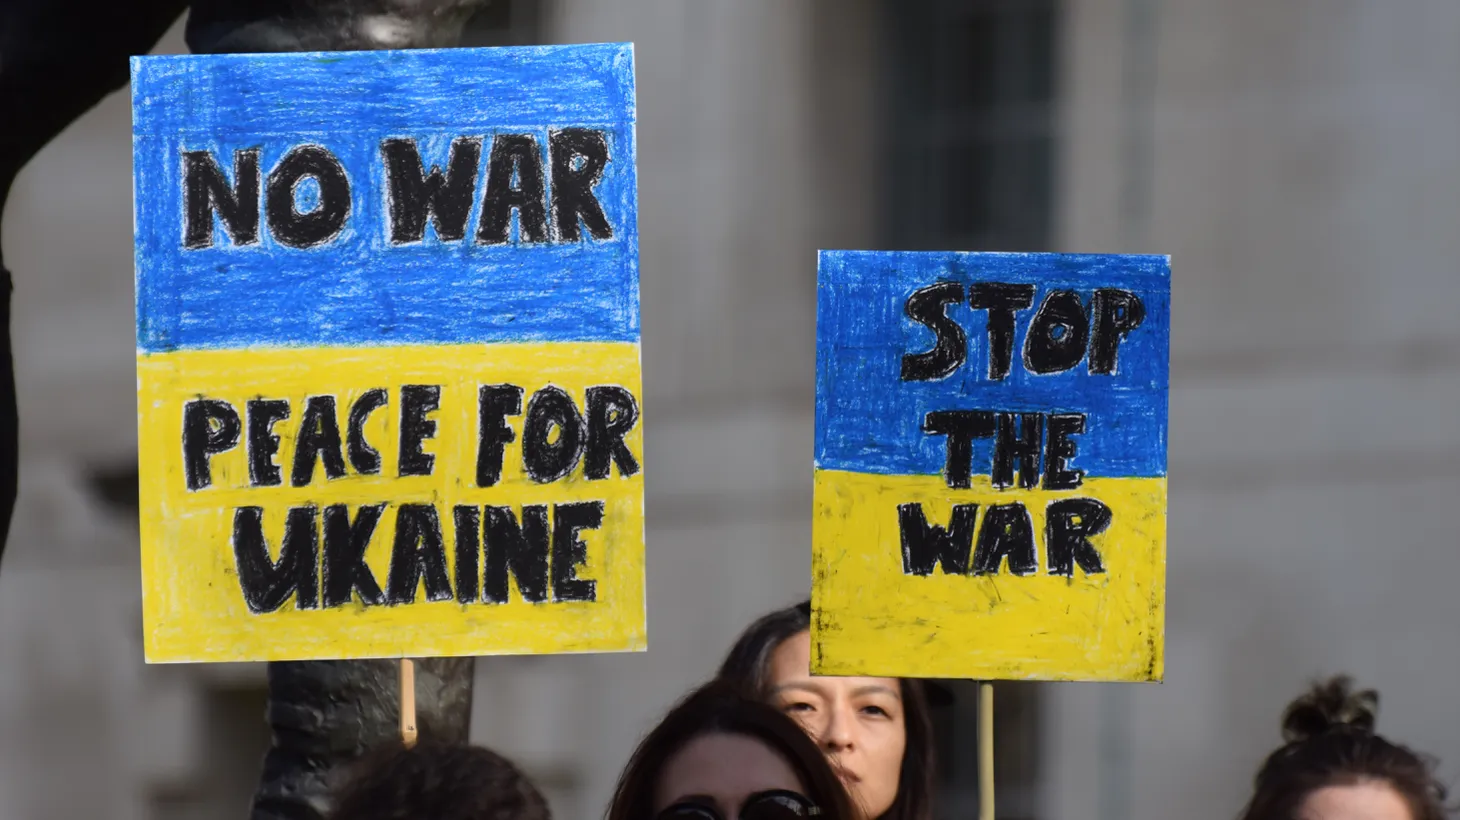 Activists hold signs that say “no war, peace for Ukraine” and “stop the war,” London, UK, Feb. 26, 2022.